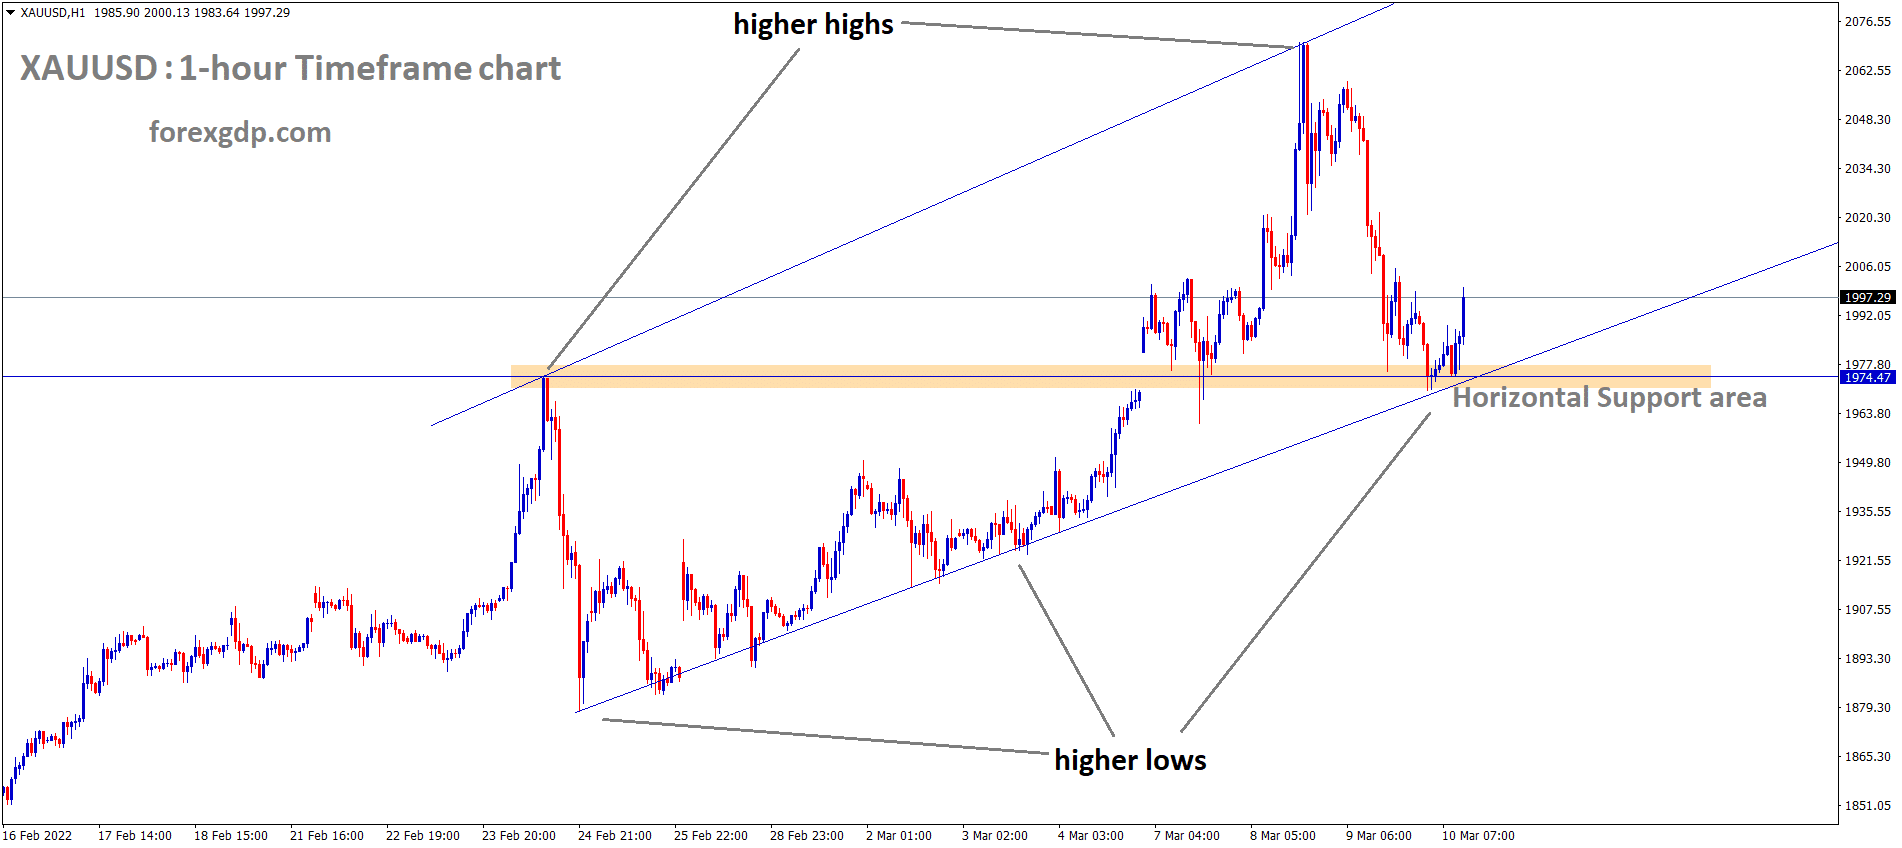 XAUUSD Gold price is moving in an Ascending channel and the market has rebounded from the higher low and Horizontal Support area of the Ascending channel